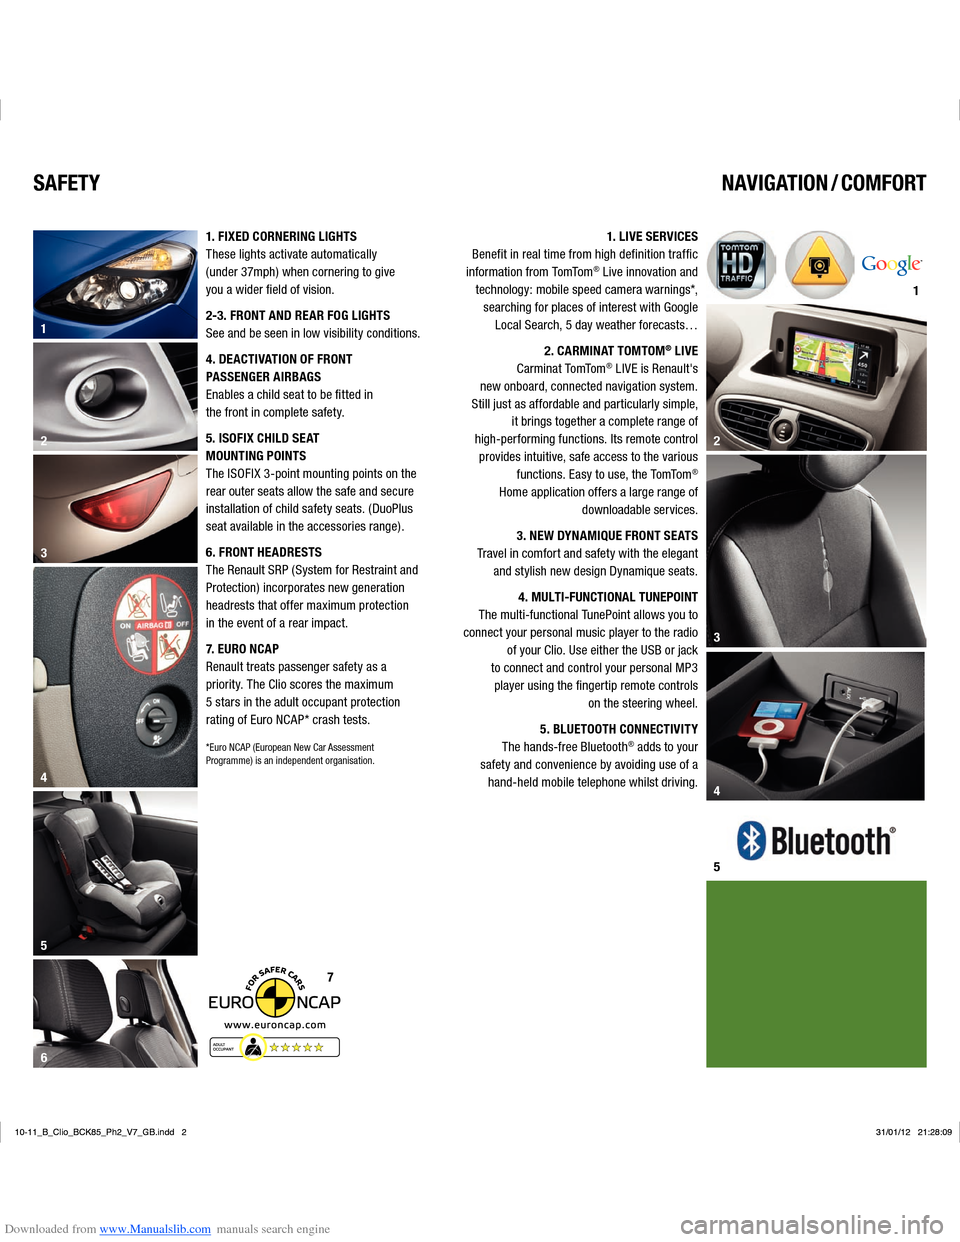 RENAULT CLIO 2012 X85 / 3.G User Manual Downloaded from www.Manualslib.com manuals search engine 56
2 1
4 3
7
21
3
4
5
SAFETY NAVIGATION / COMFORT
1. FIXED CORNERING LIGHTS
These lights activate automatically 
(under 37mph) when cornering t